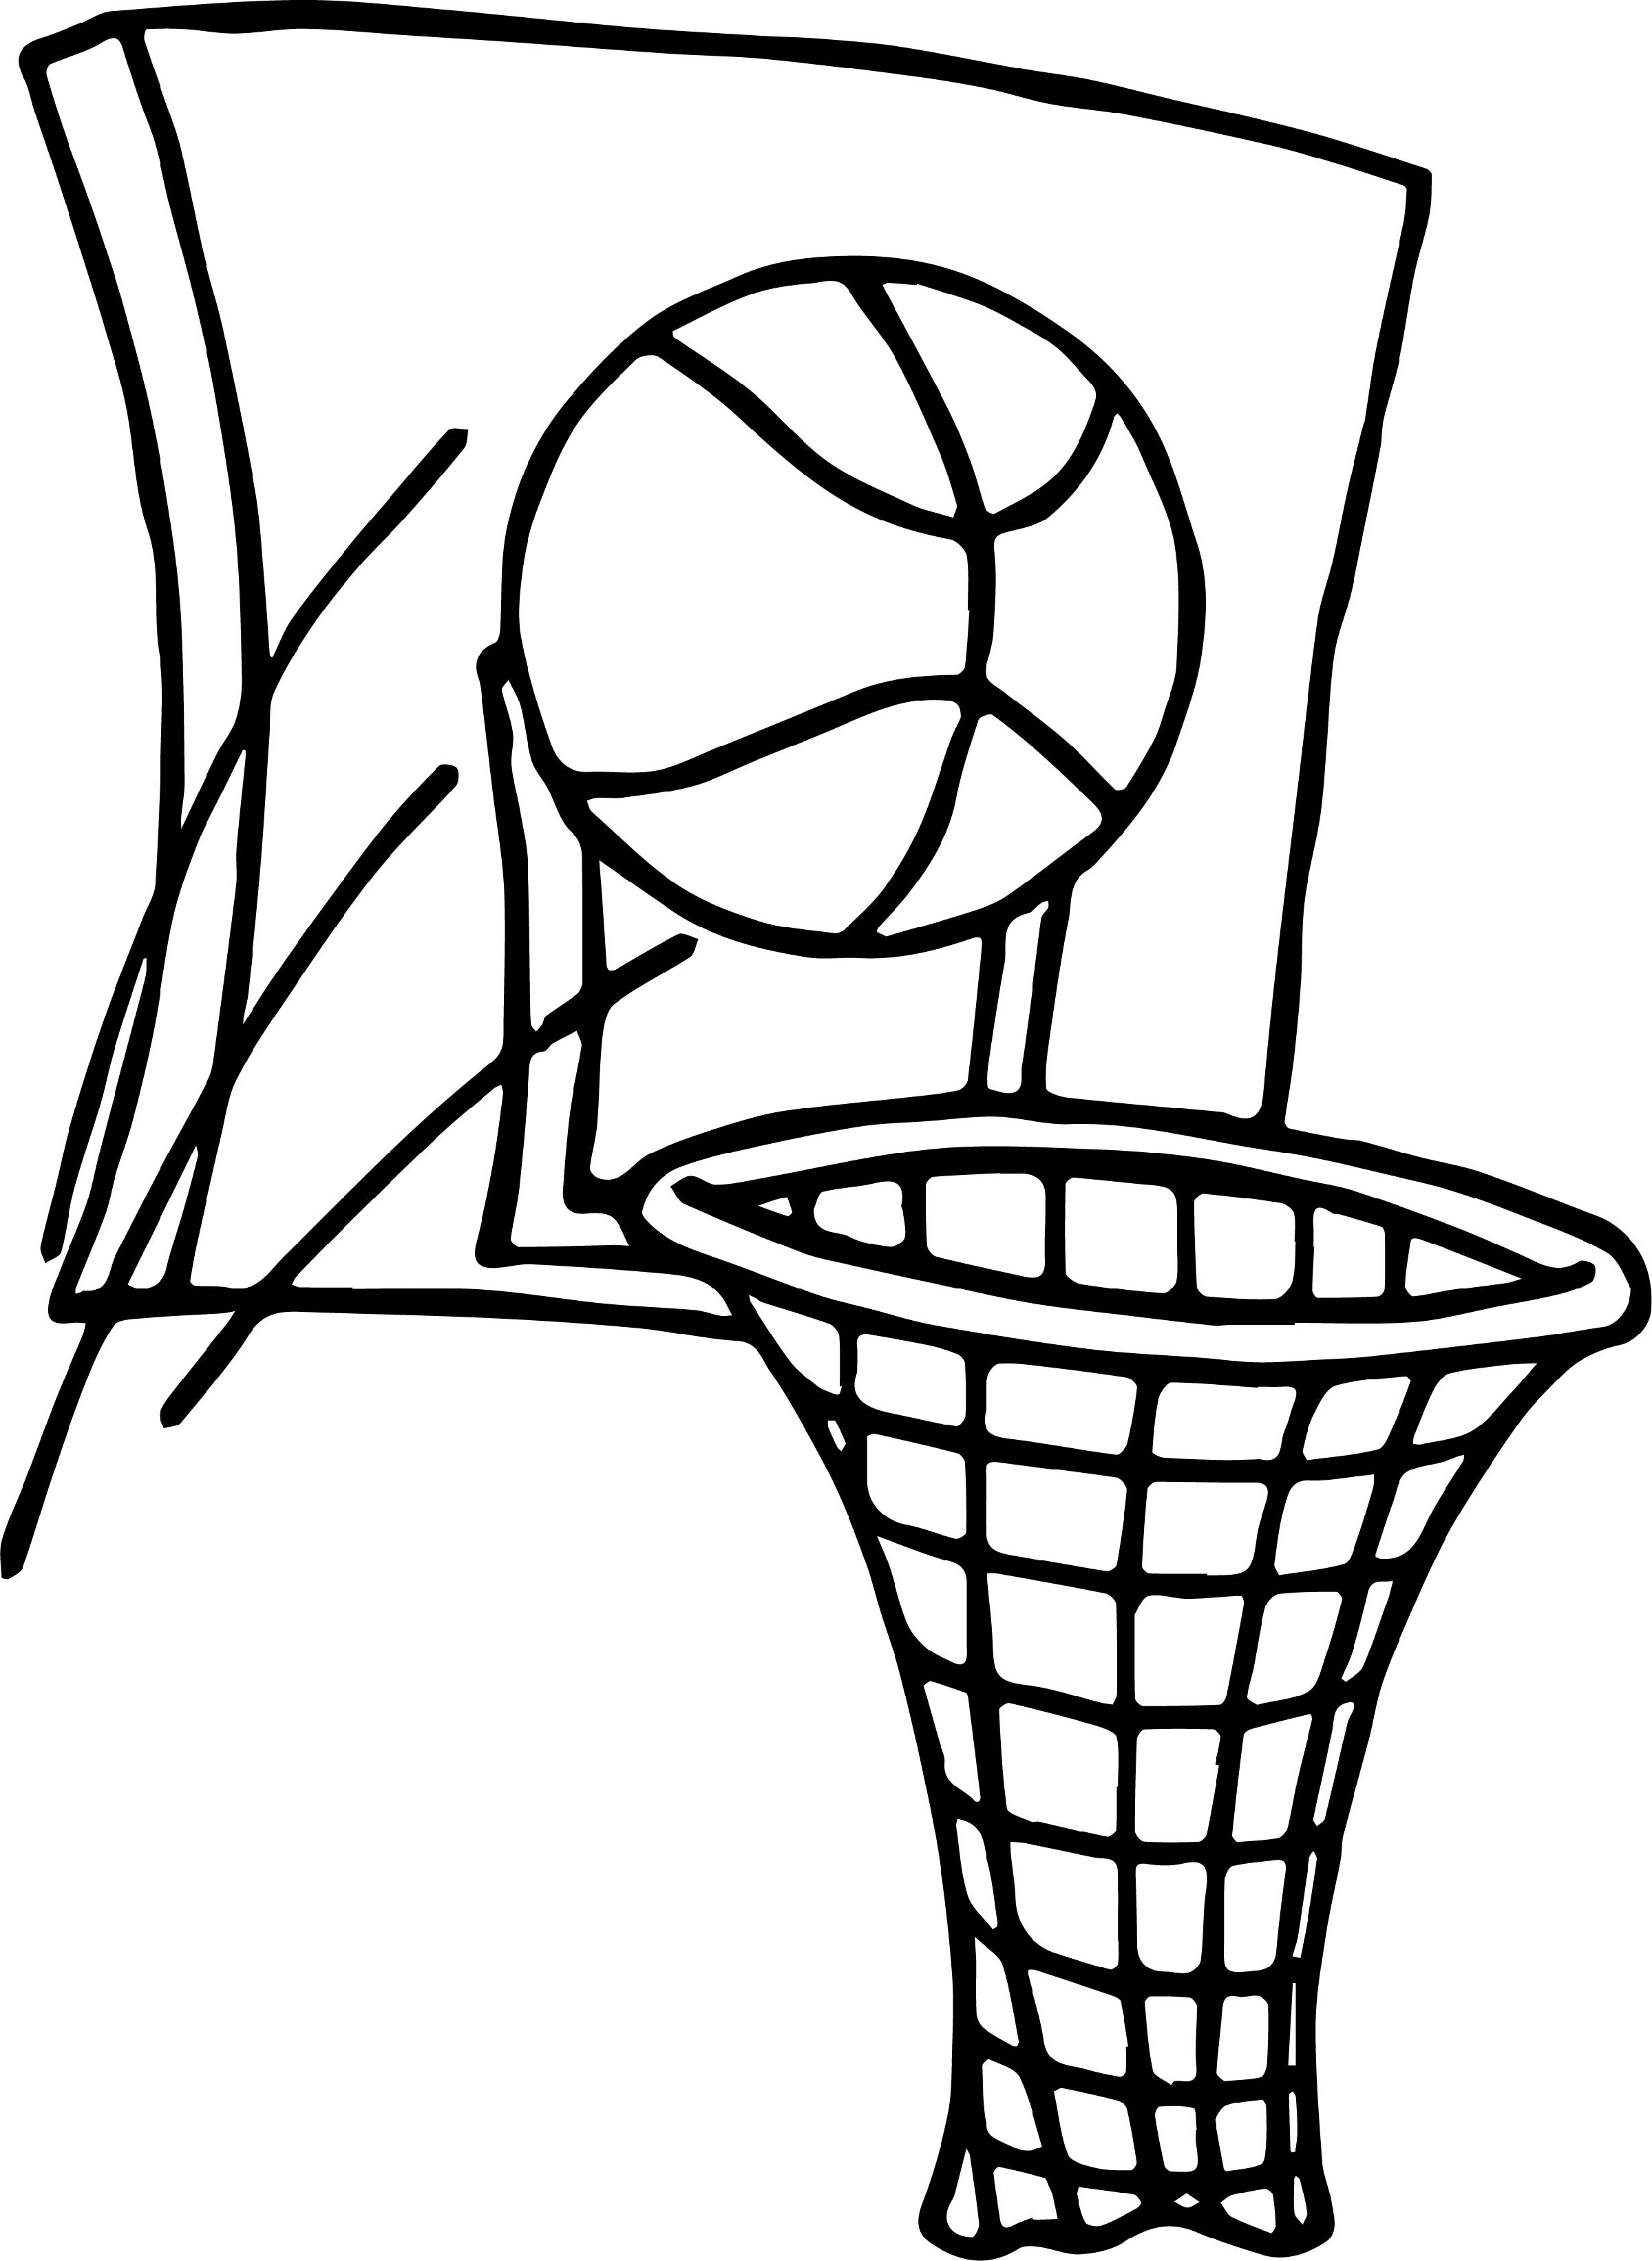 basketball coloring pages basketball free to color for kids  basketball kids pages coloring basketball